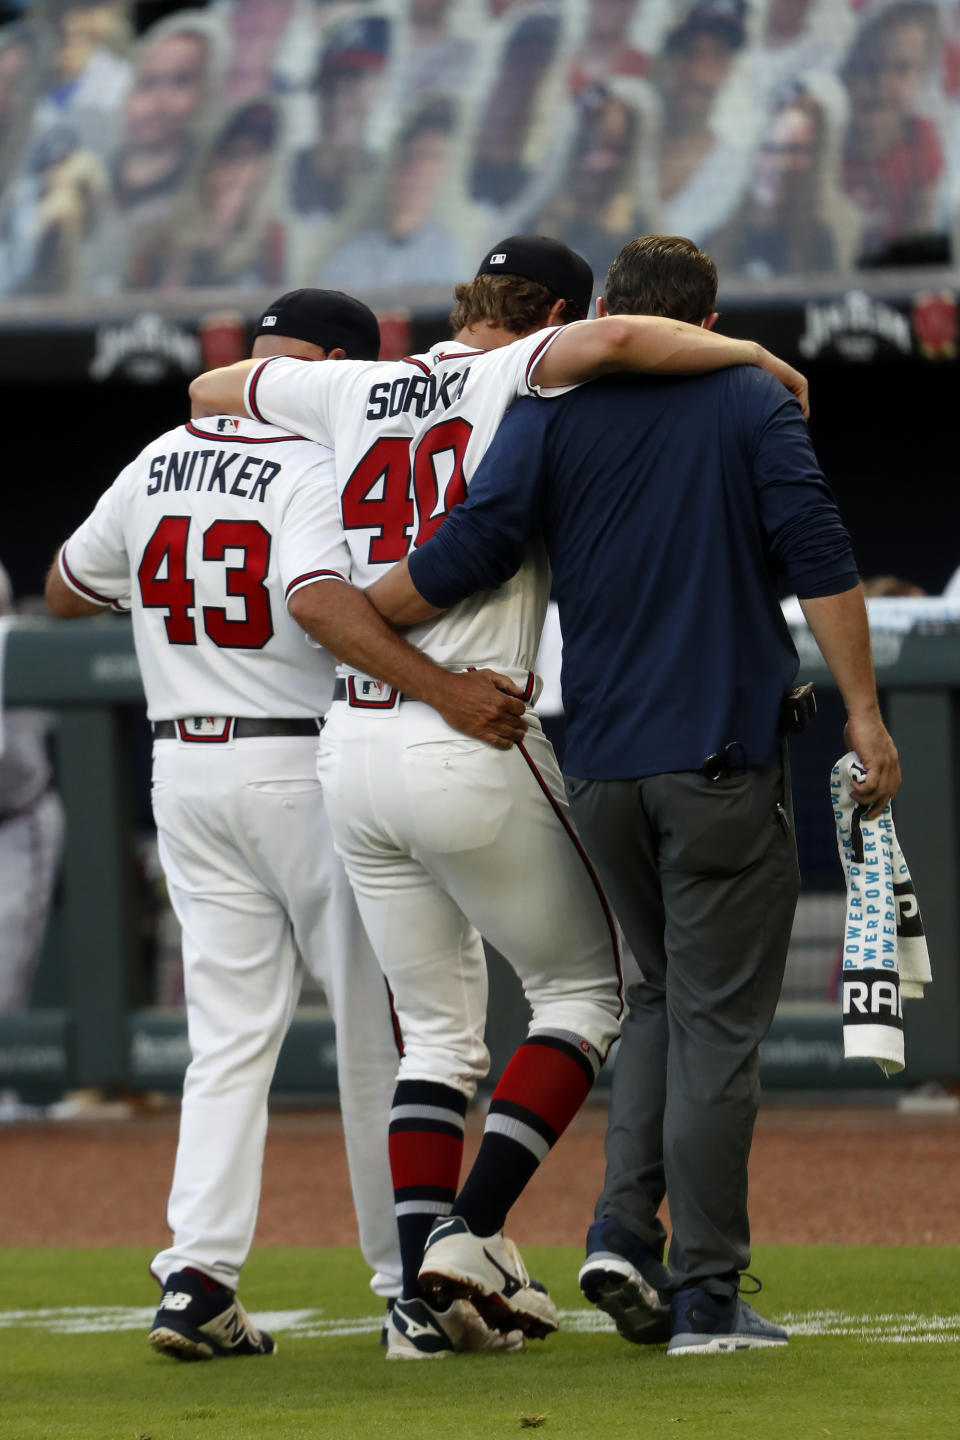 Atlanta Braves starting pitcher Mike Soroka (40) is helped off the field by manager Brian Snitker (43) and a trainer after being injured in the third inning of a baseball game against the New York Mets Monday, Aug. 3, 2020, in Atlanta. (AP Photo/John Bazemore)